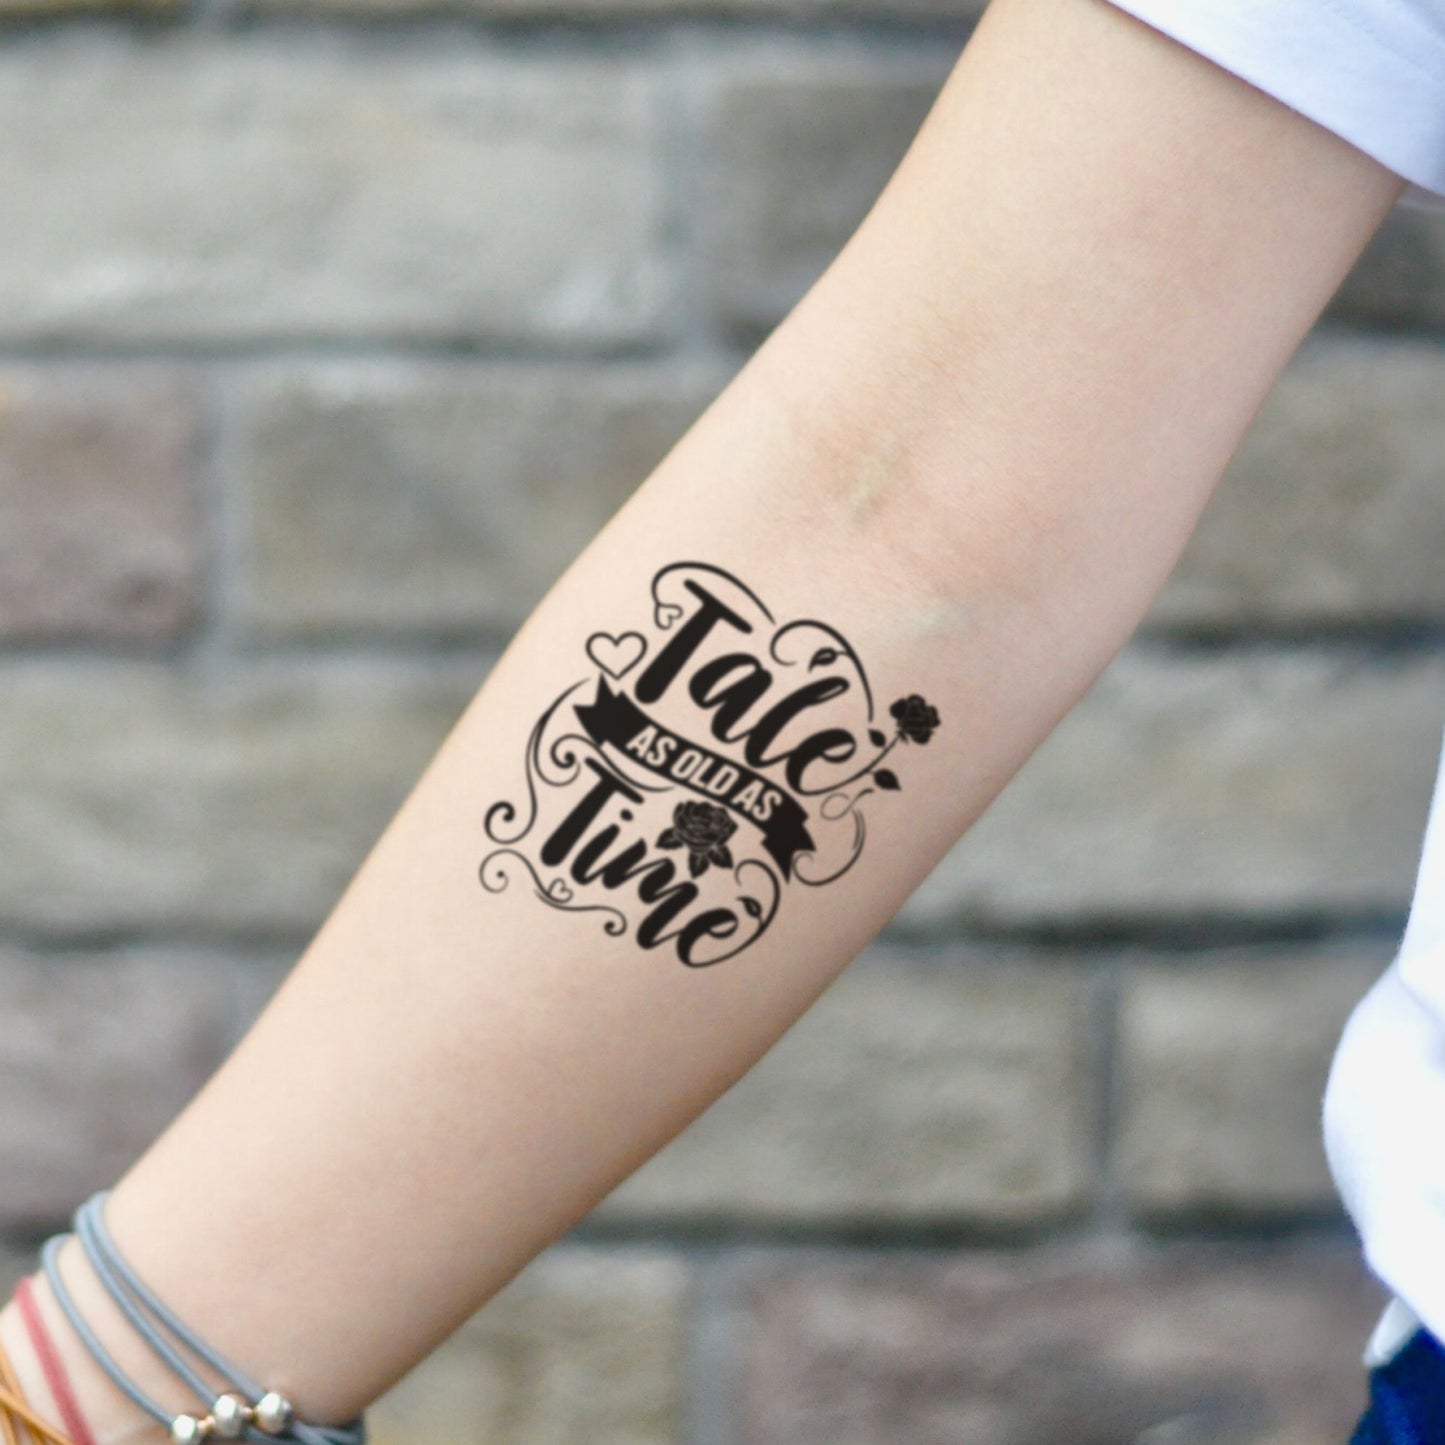 fake small tale as old as time lettering temporary tattoo sticker design idea on inner arm